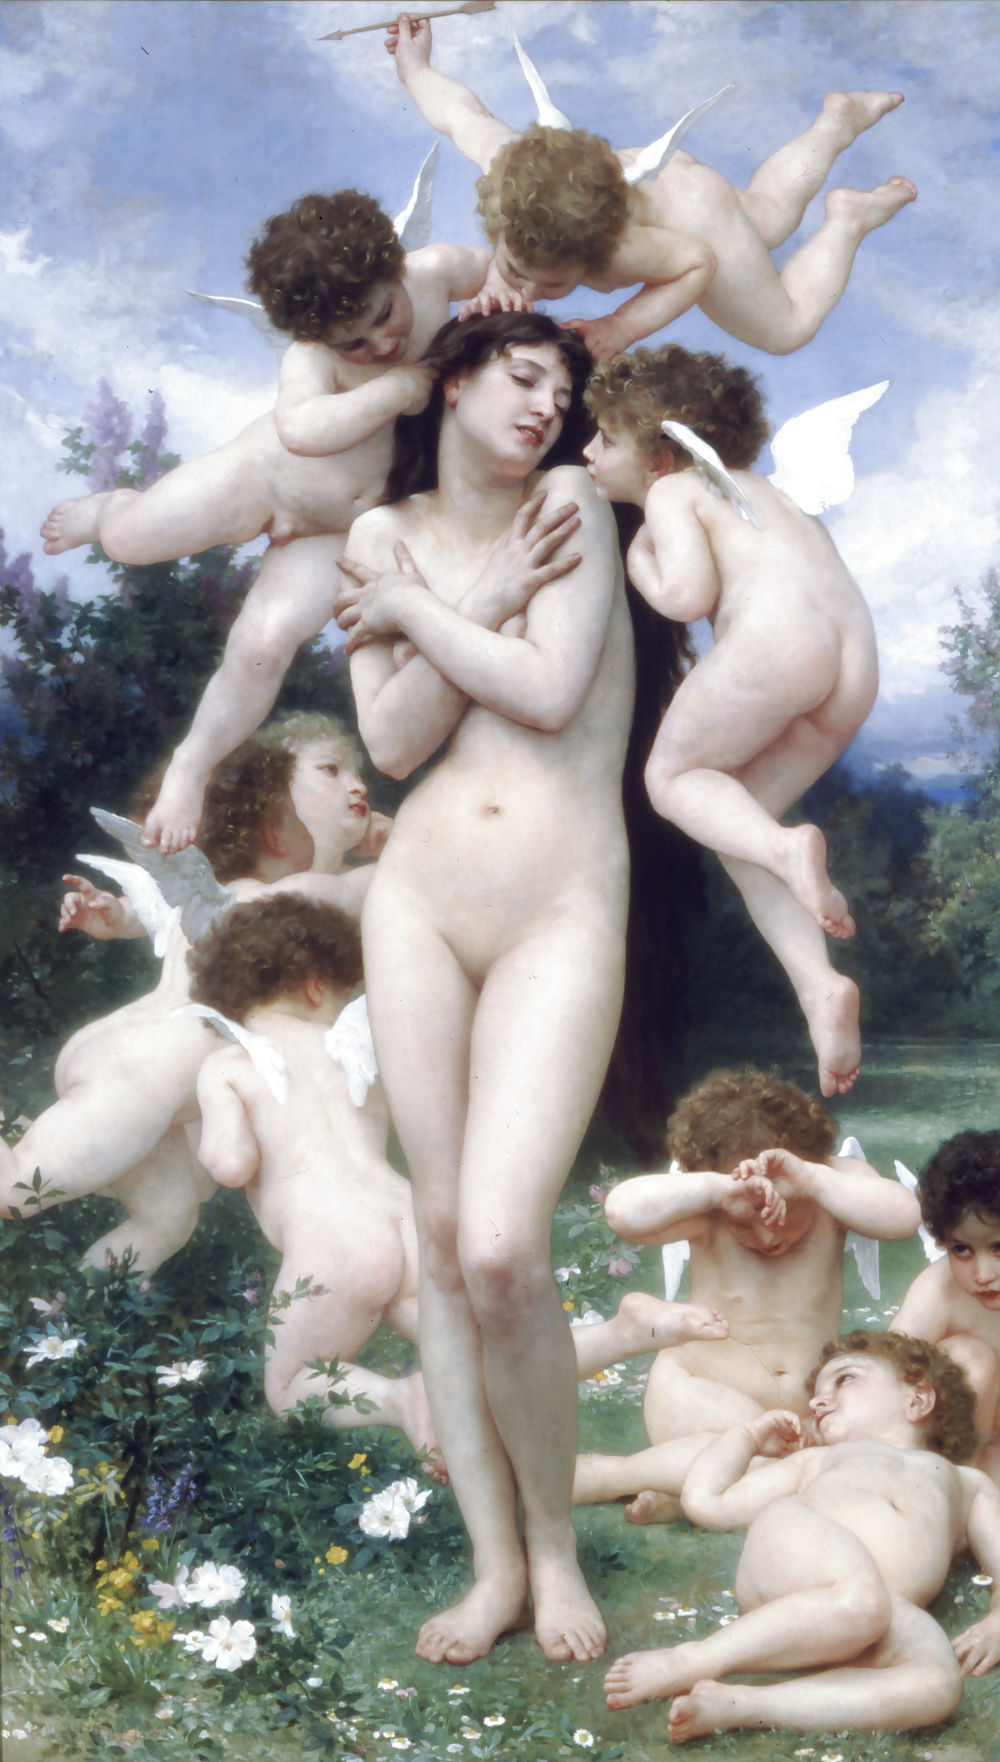 Painted Ero and Porn Art 7 - Adolphe-Willian Bouguereau #6503785